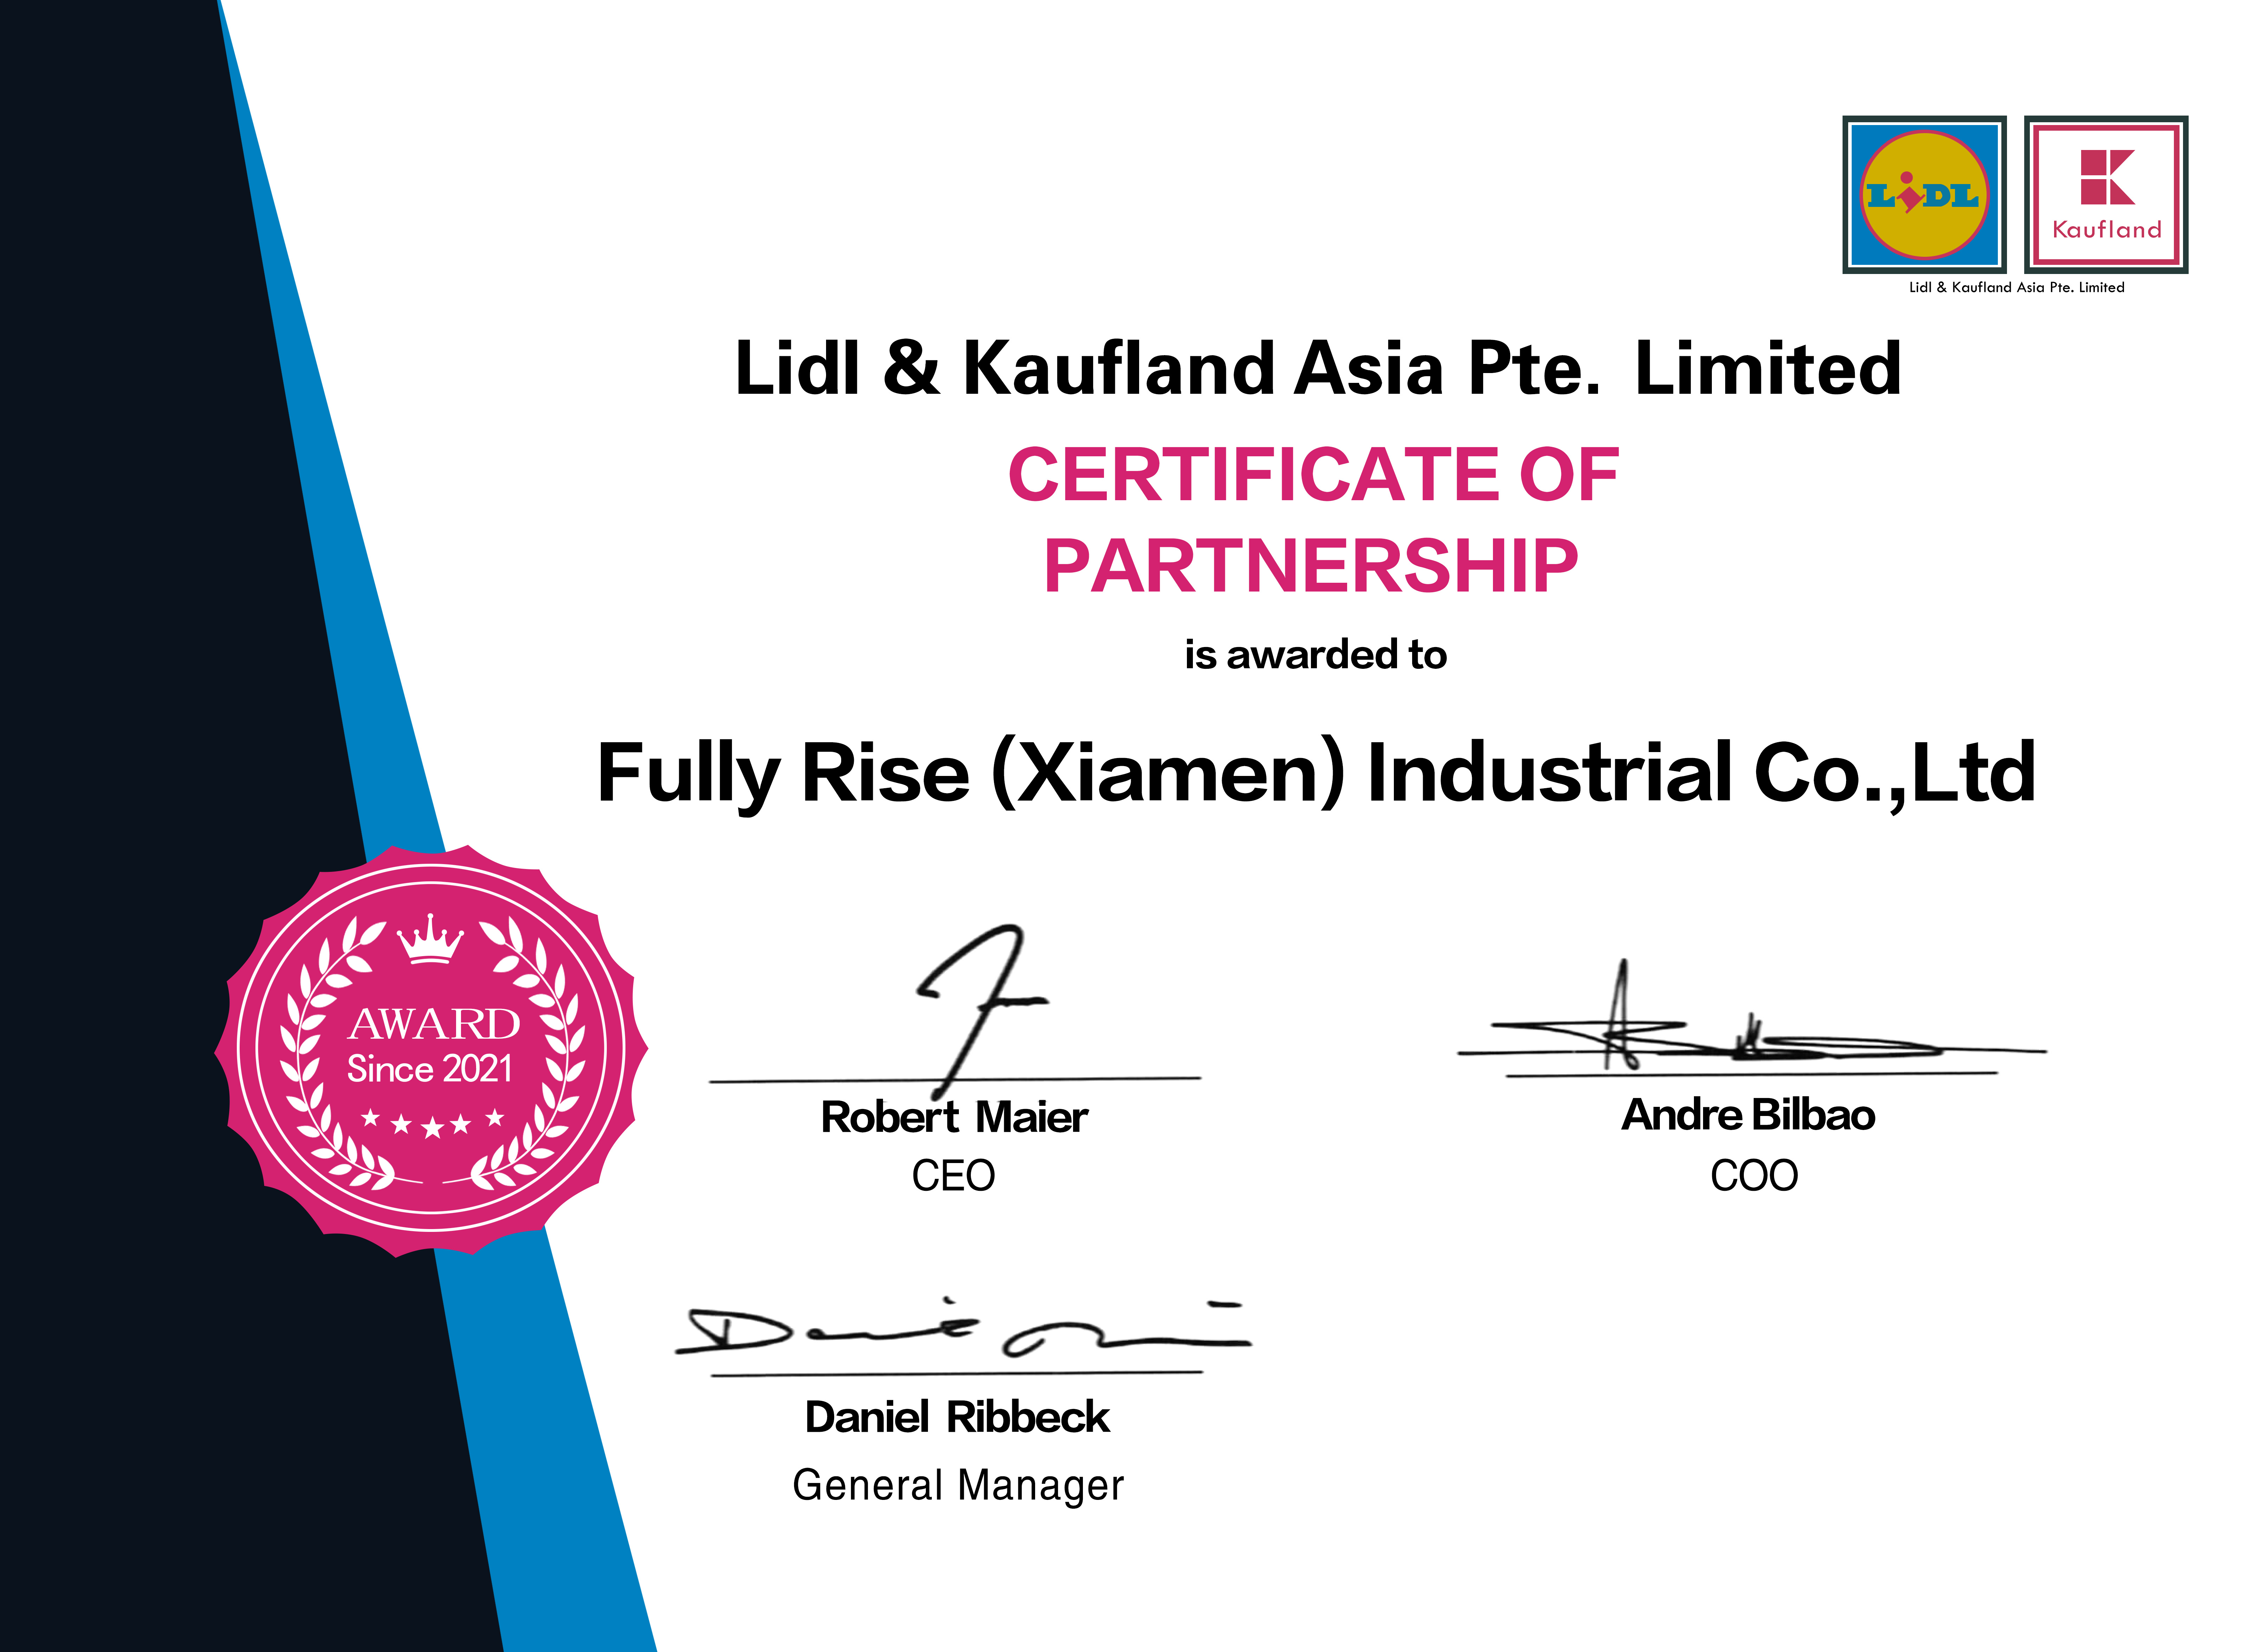 Partnership Certified By Lidl & Kaufland Asia Pte. Limited